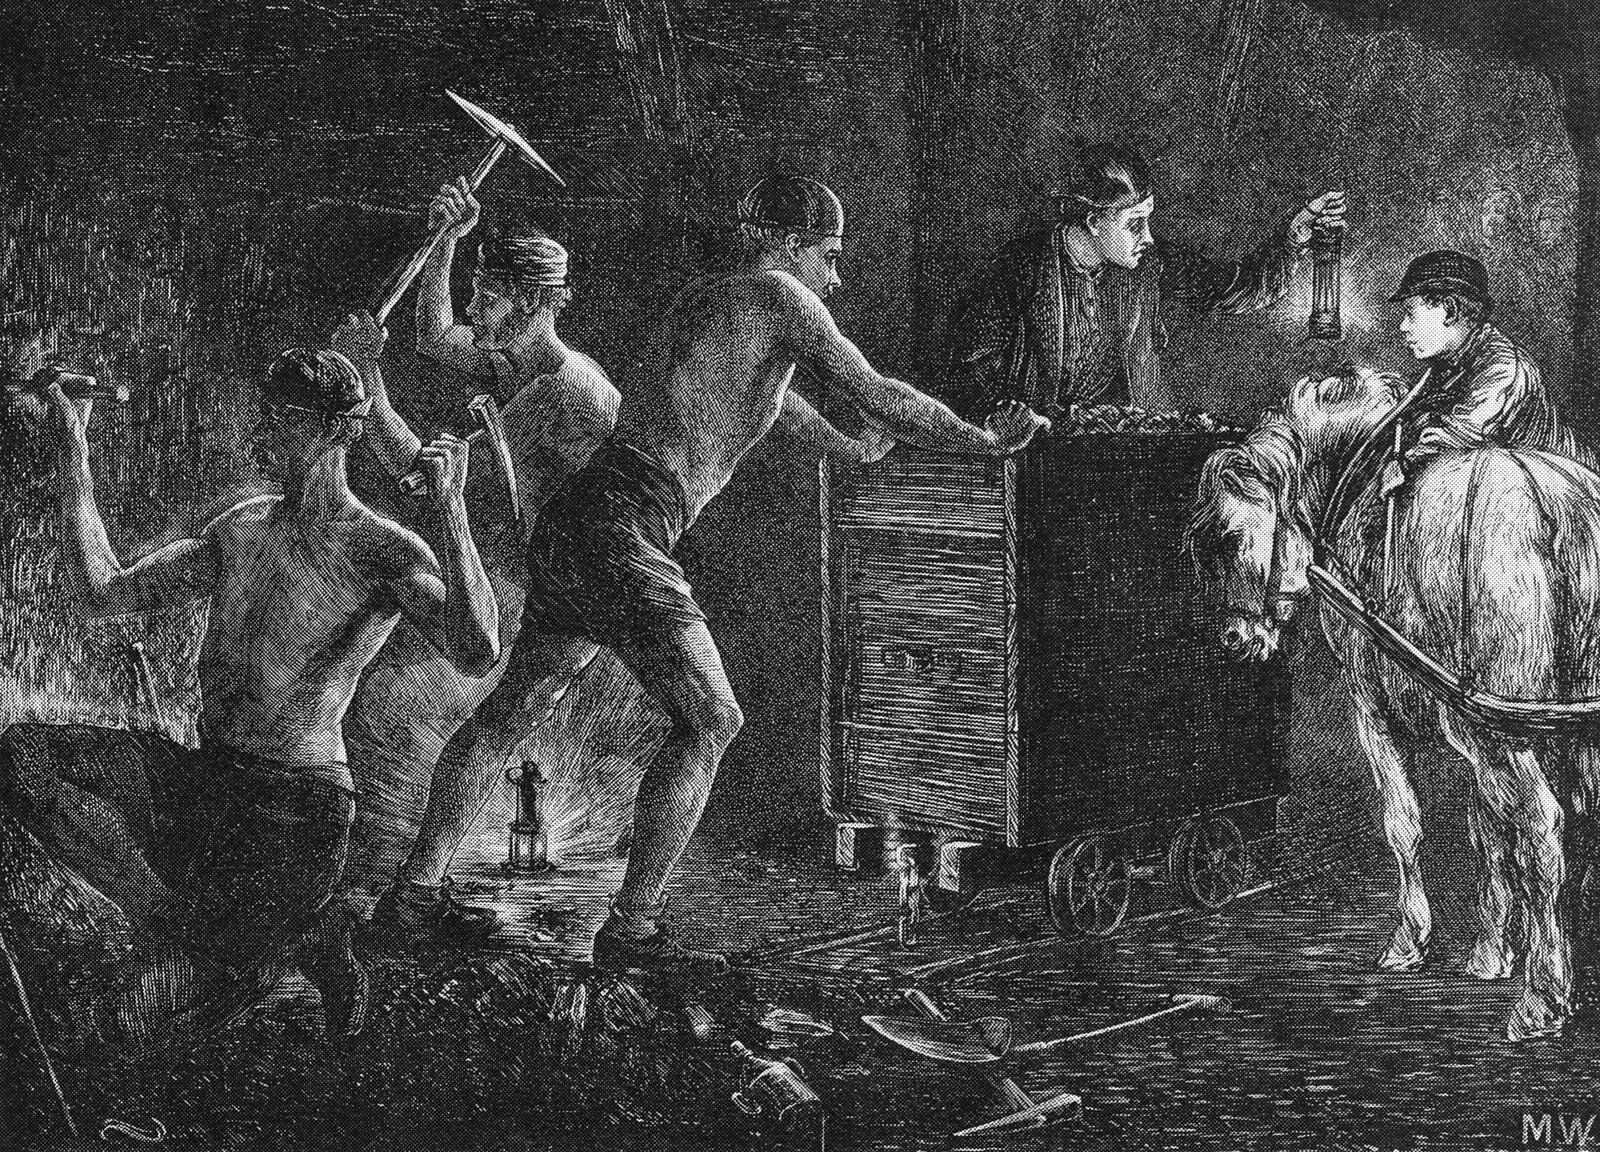 Coal mining. Illustration from The Graphic 1871.